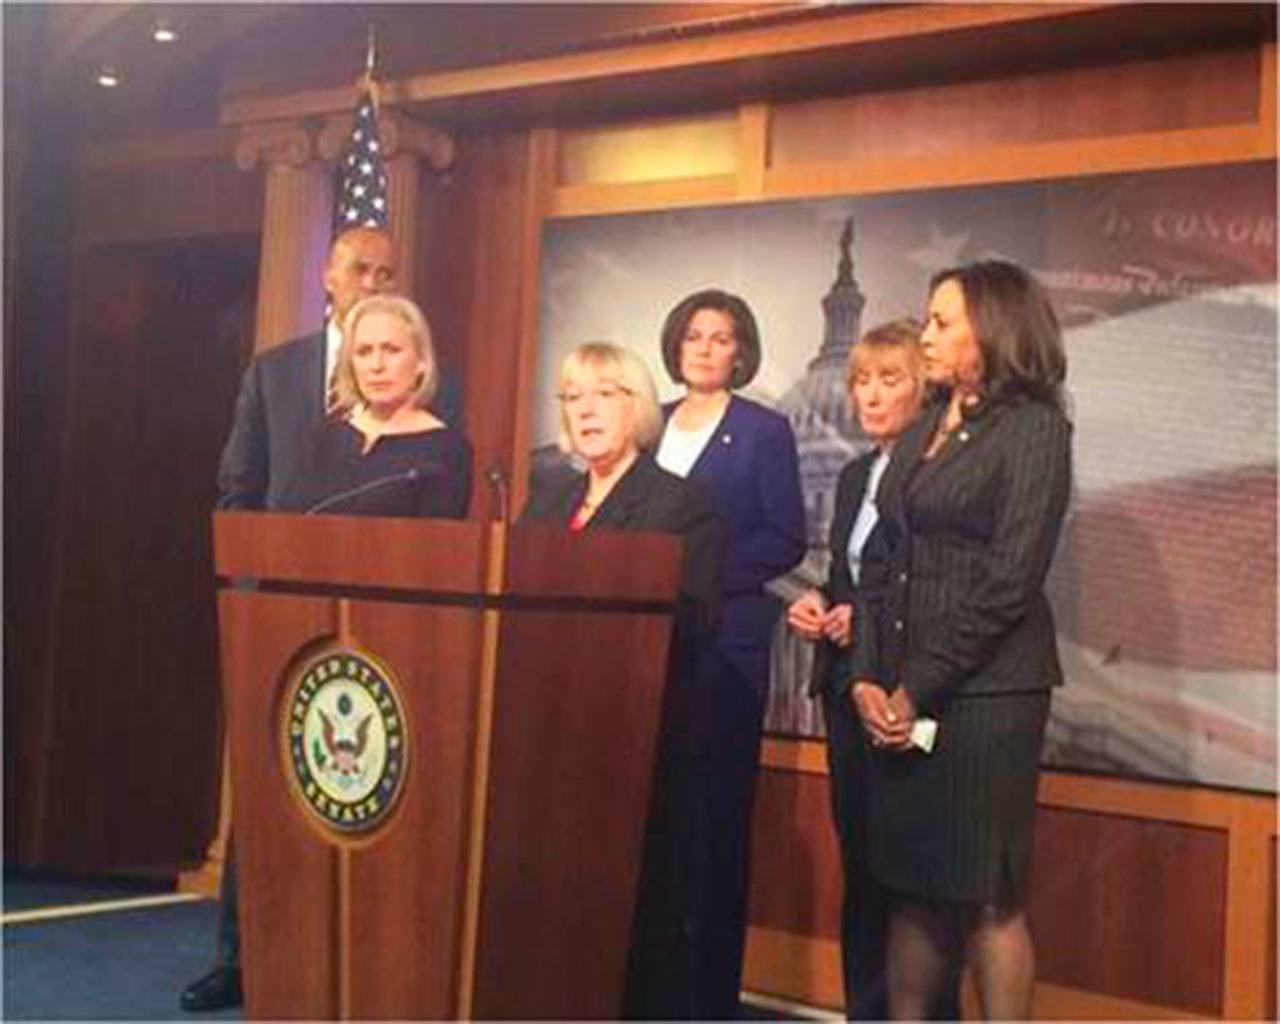 Sen. Murray expresses outrage at Republican plan to defund Planned Parenthood